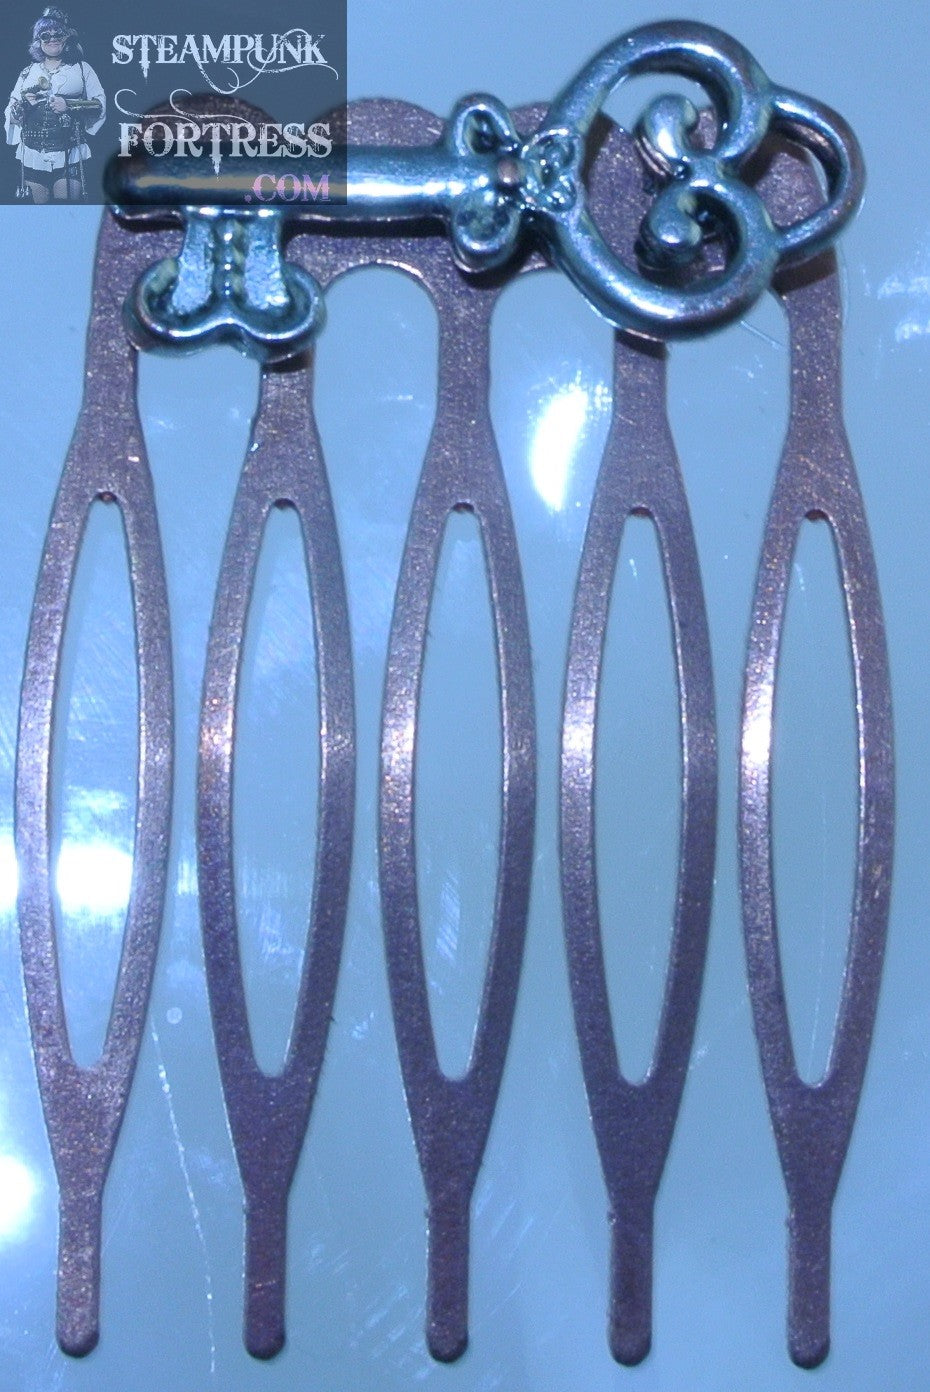 HAIR COMB COPPER KEY SILVER SMALL JEWELRY STARR WILDE STEAMPUNK FORTRESS VICTORIAN WEDDING KEY TO MY HEART